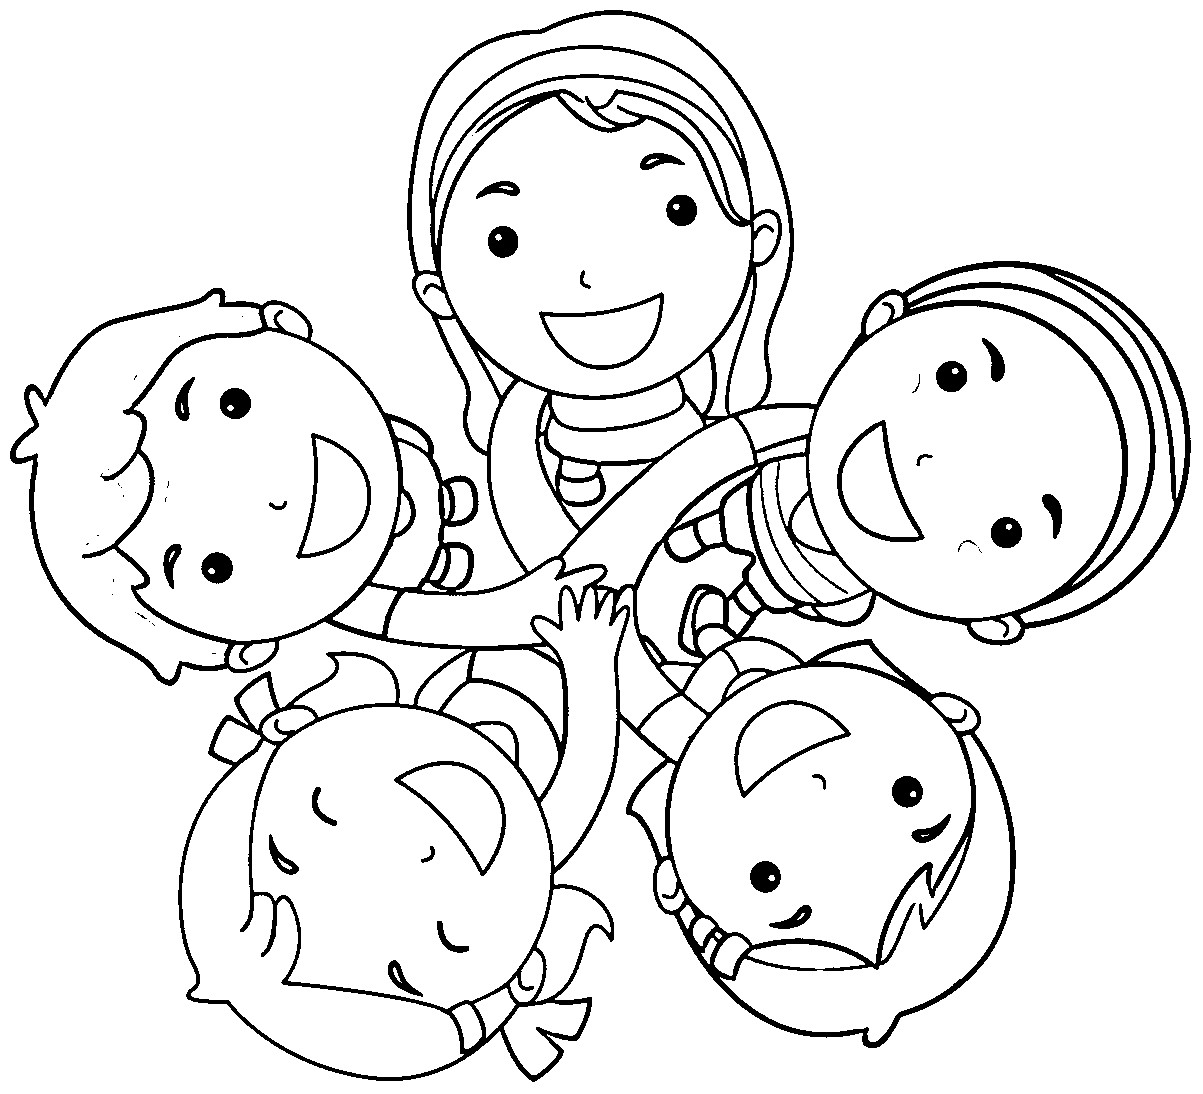 Best Coloring Pages For Kids
 Friendship Coloring Pages Best Coloring Pages For Kids